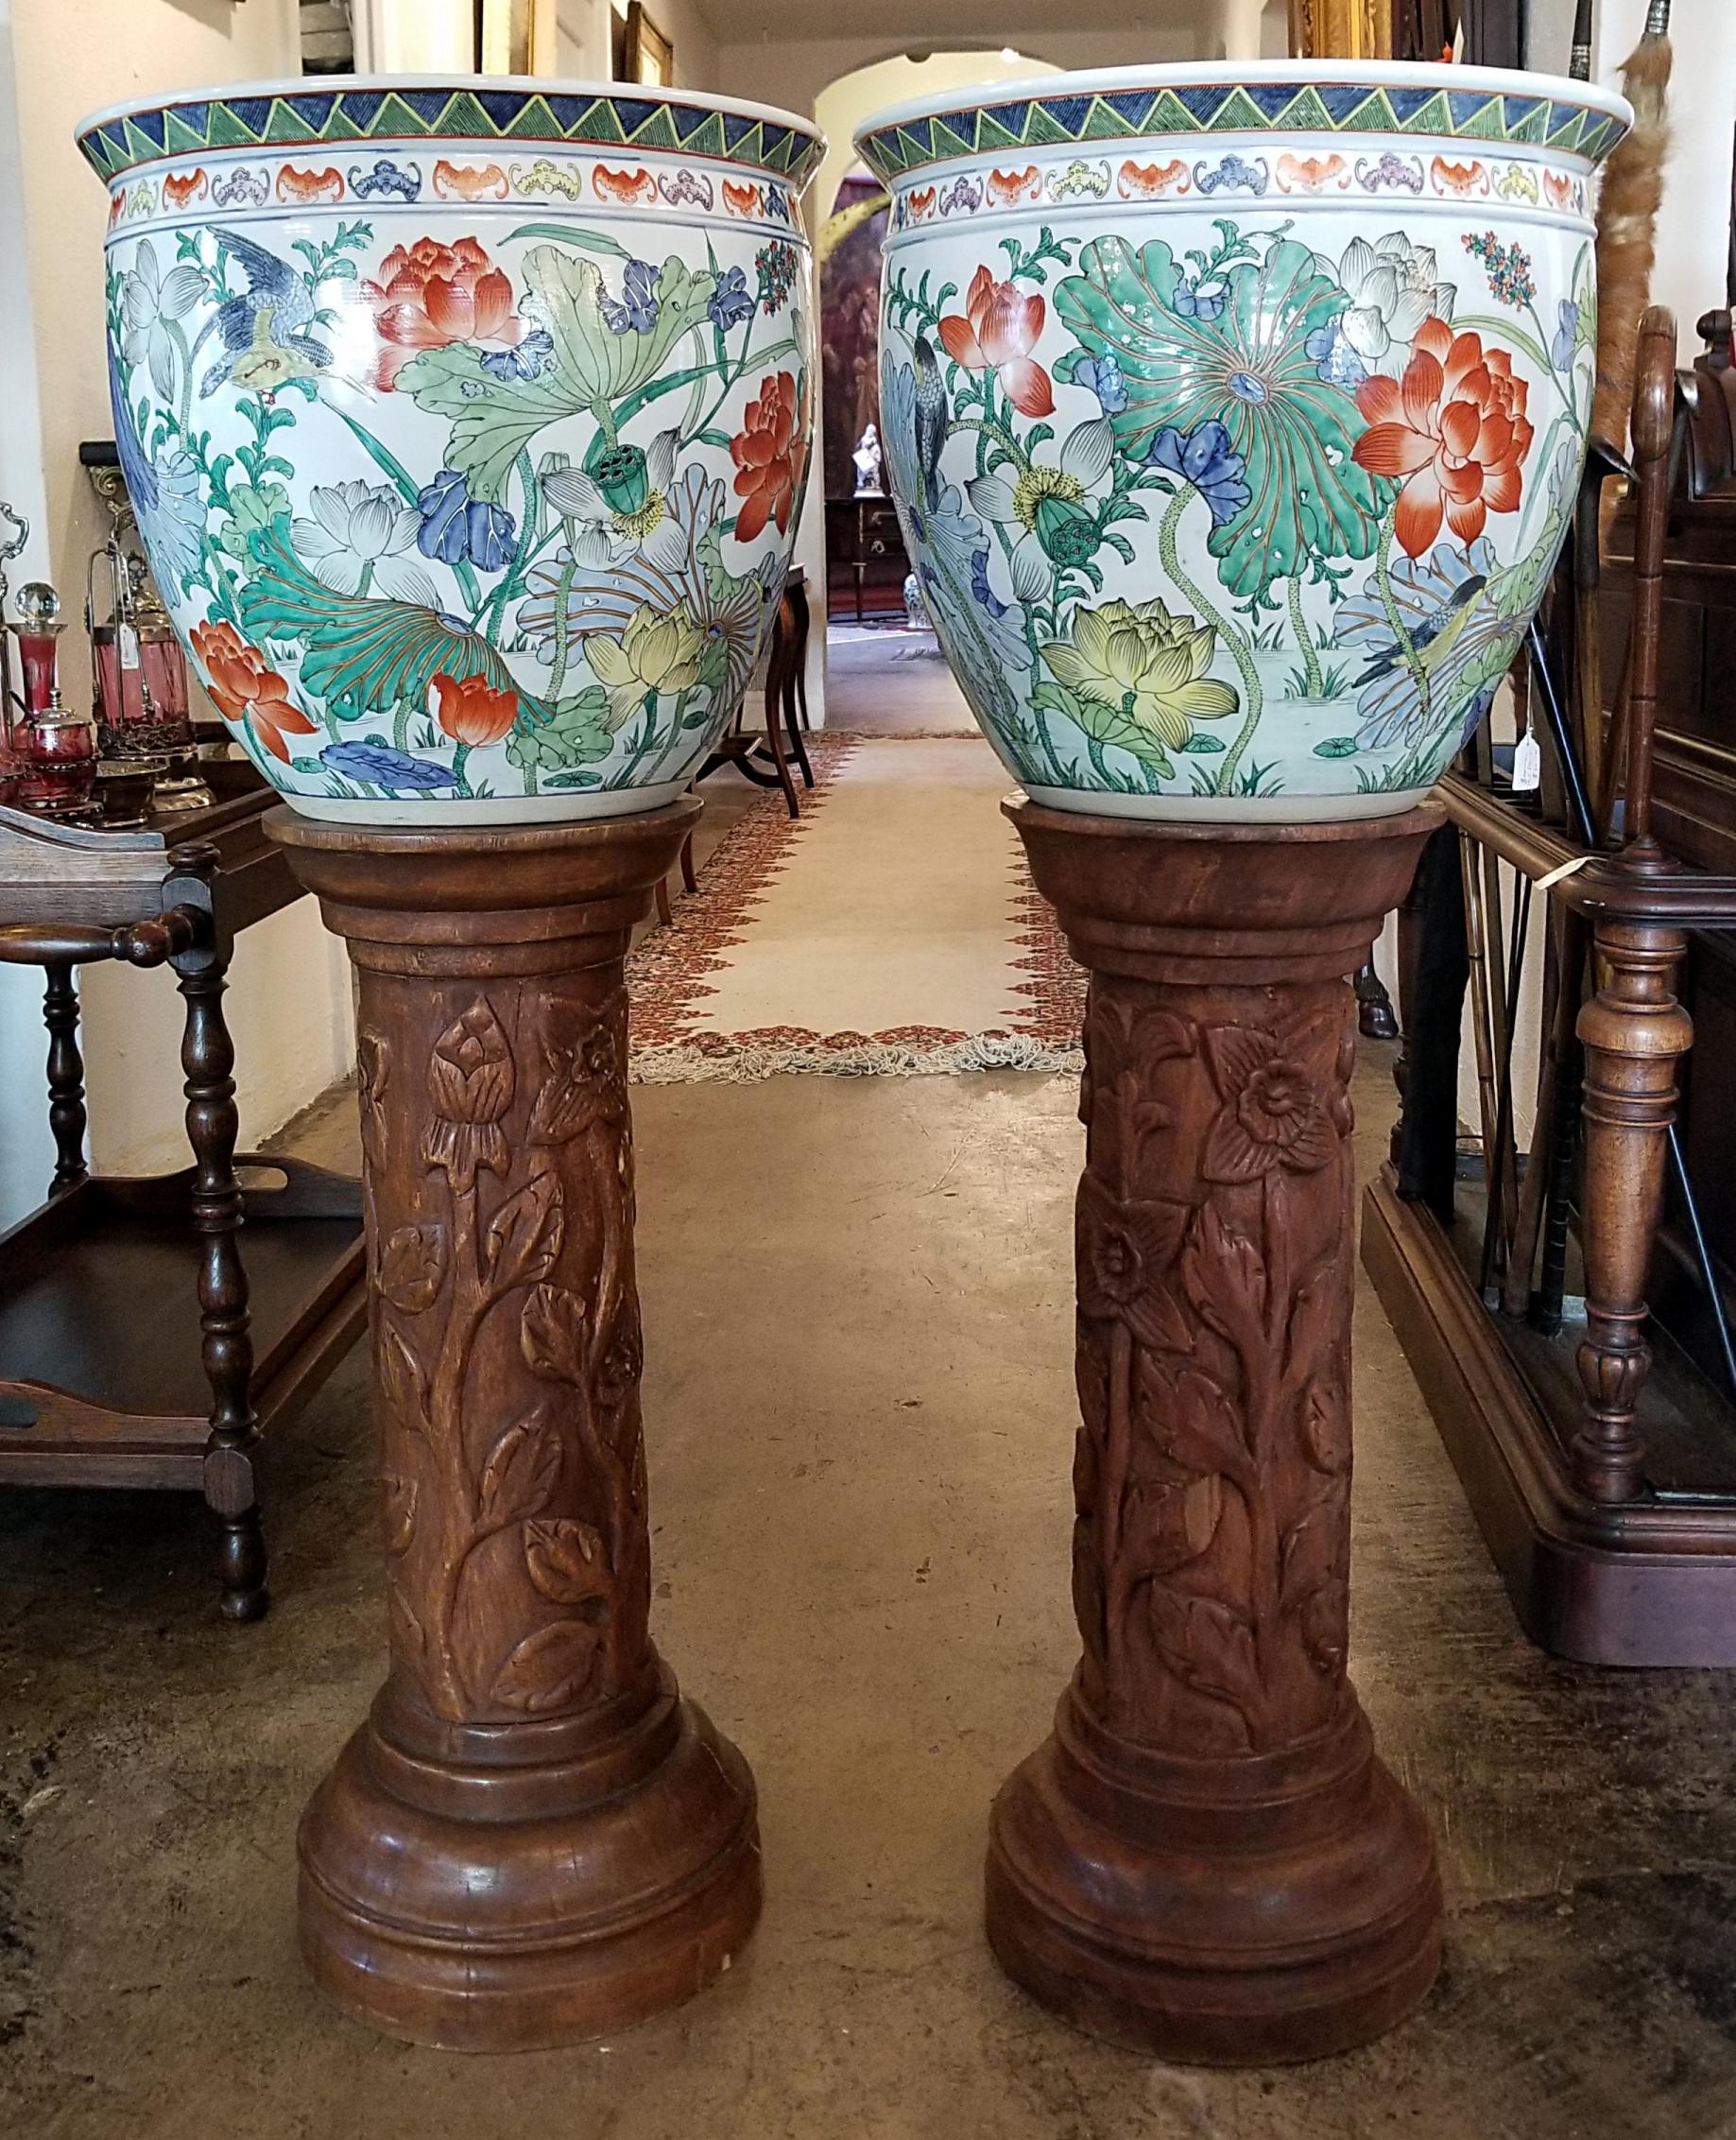 Presenting a stunning pair of oriental fish bowls made for Gumps of San Francisco on solid hand carved, floral, French walnut jardinières.

The fish bowls are probably mid-20th century and are fully marked. Chinese export specifically for